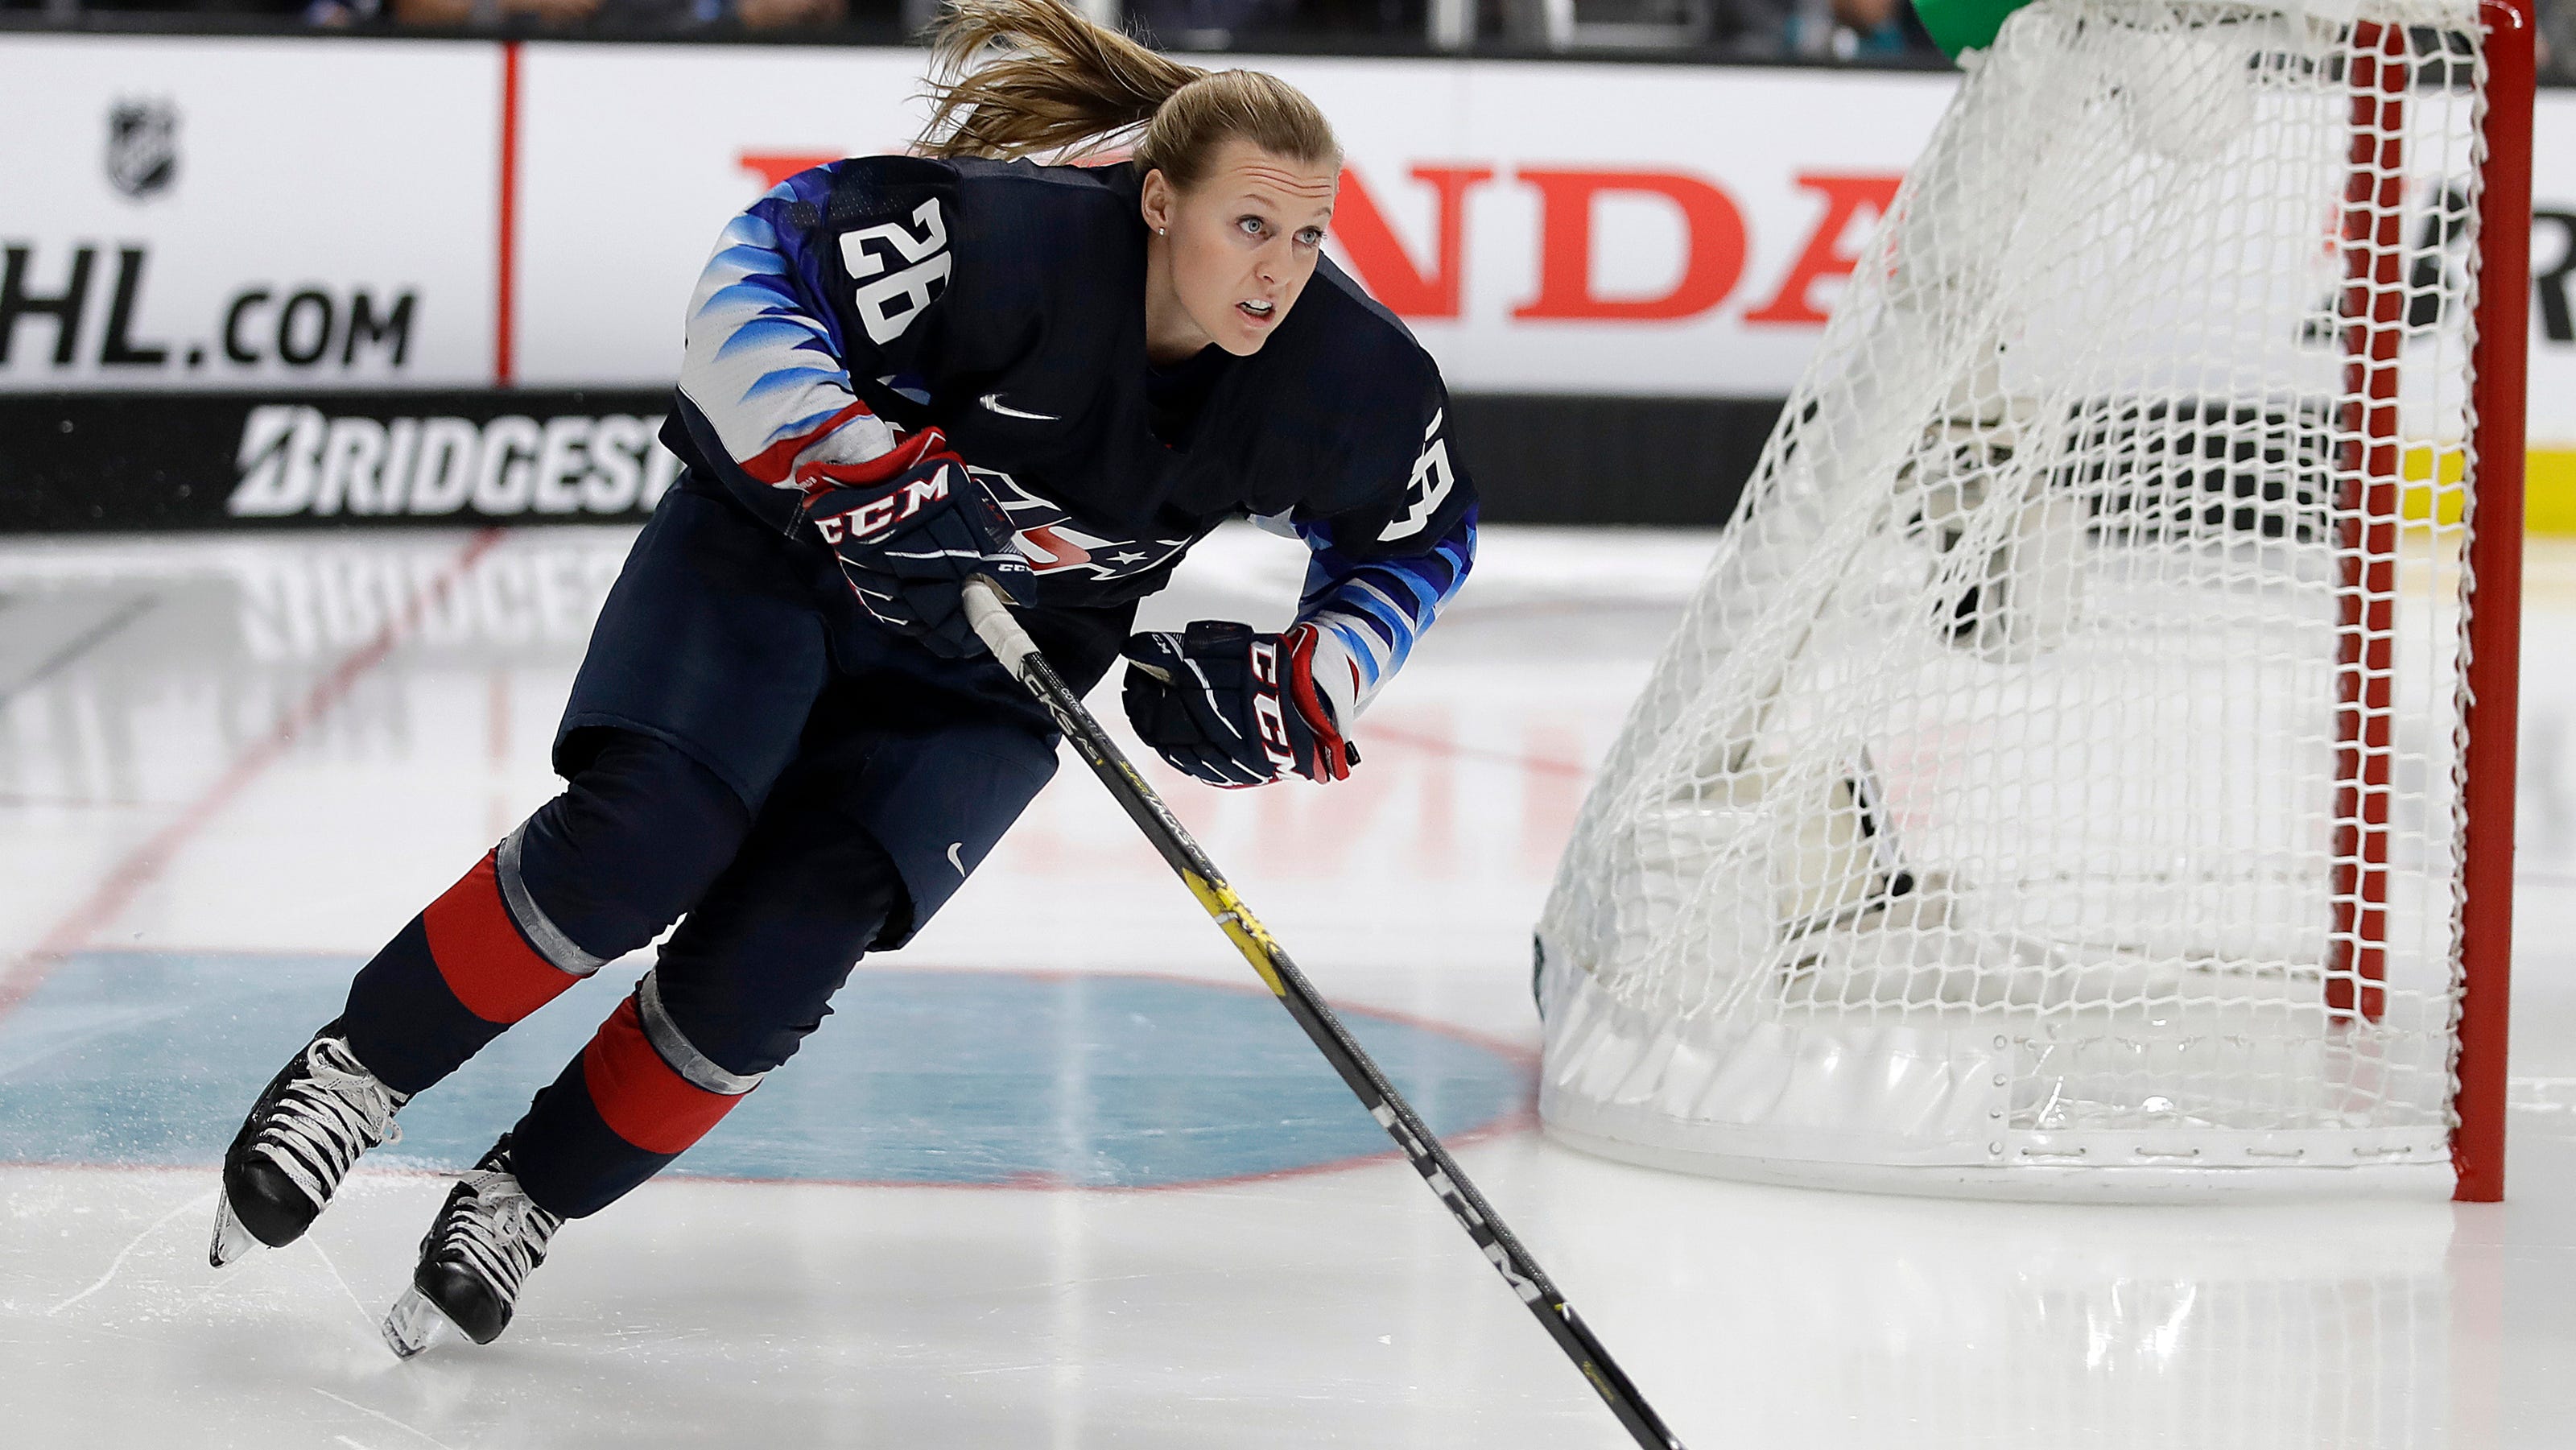 Top women's players to be part of NHL AllStar Weekend